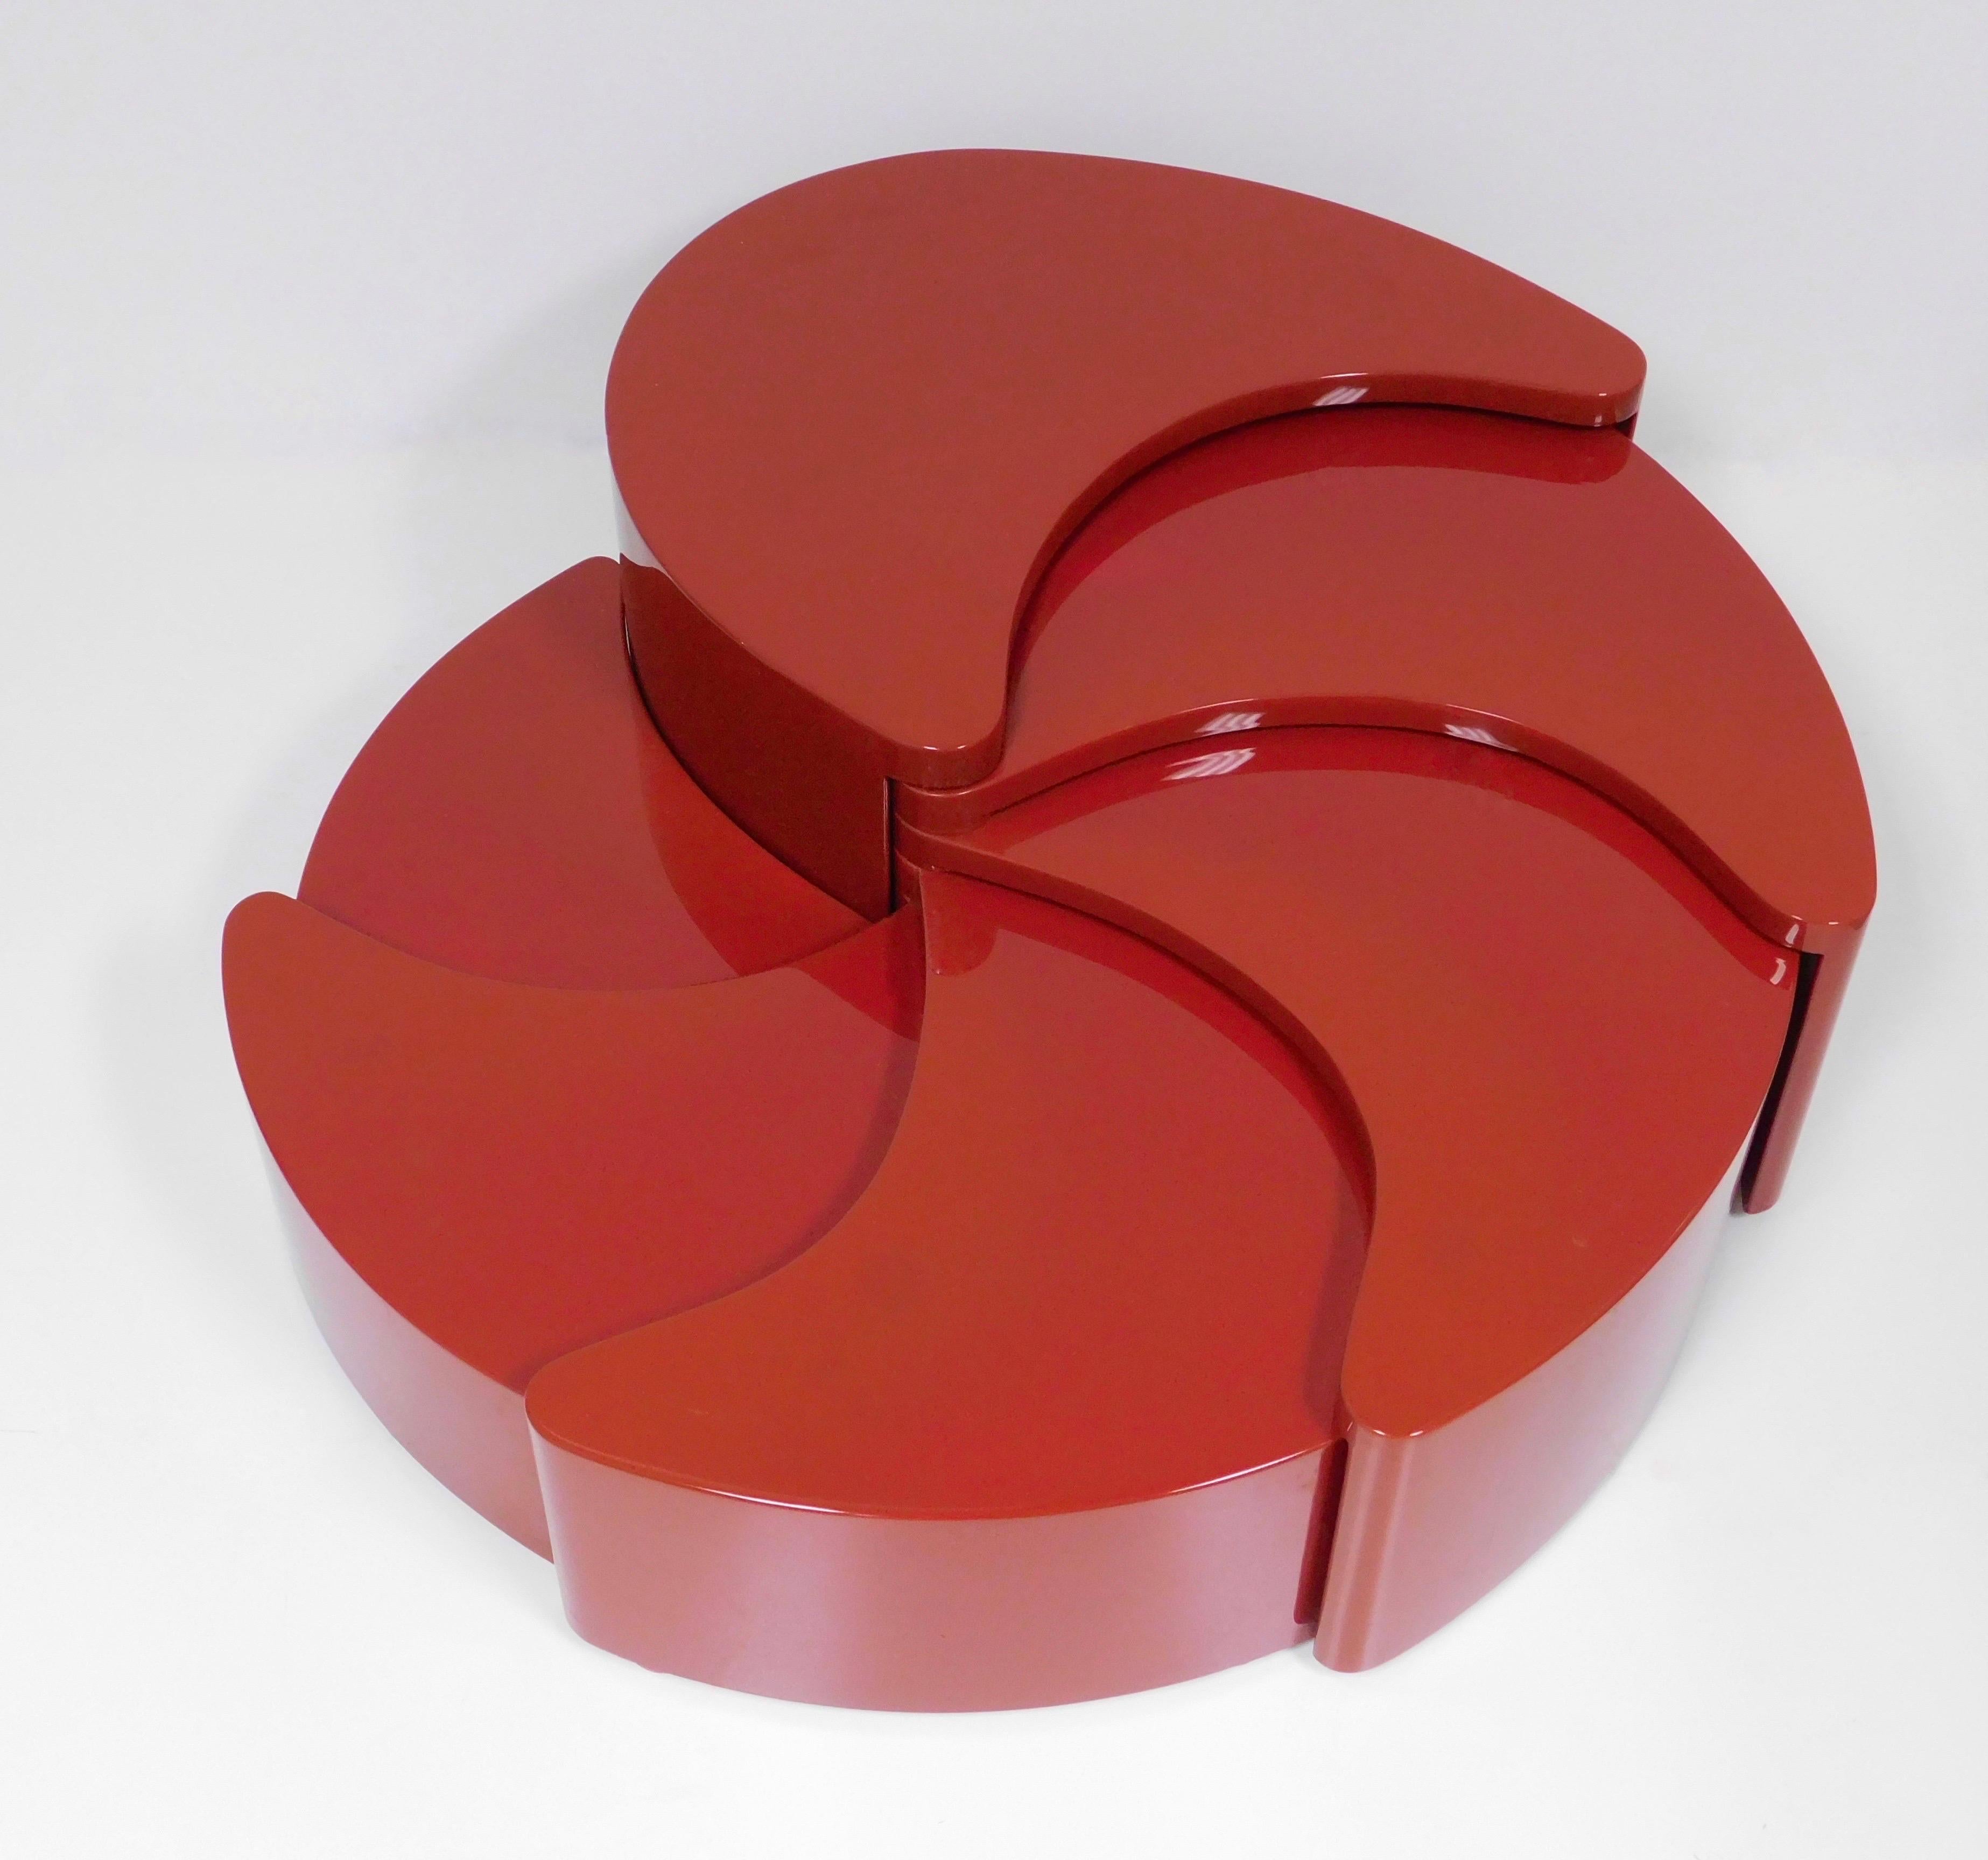 A rare example of this extraordinary design. 
Eclipse belongs to the Plurimi series, the methamophic tables designed by Gabriella Crespi between 1970 and 1982. It was presented in 1980 and exhibited at the museum of Science and Technology in Milan